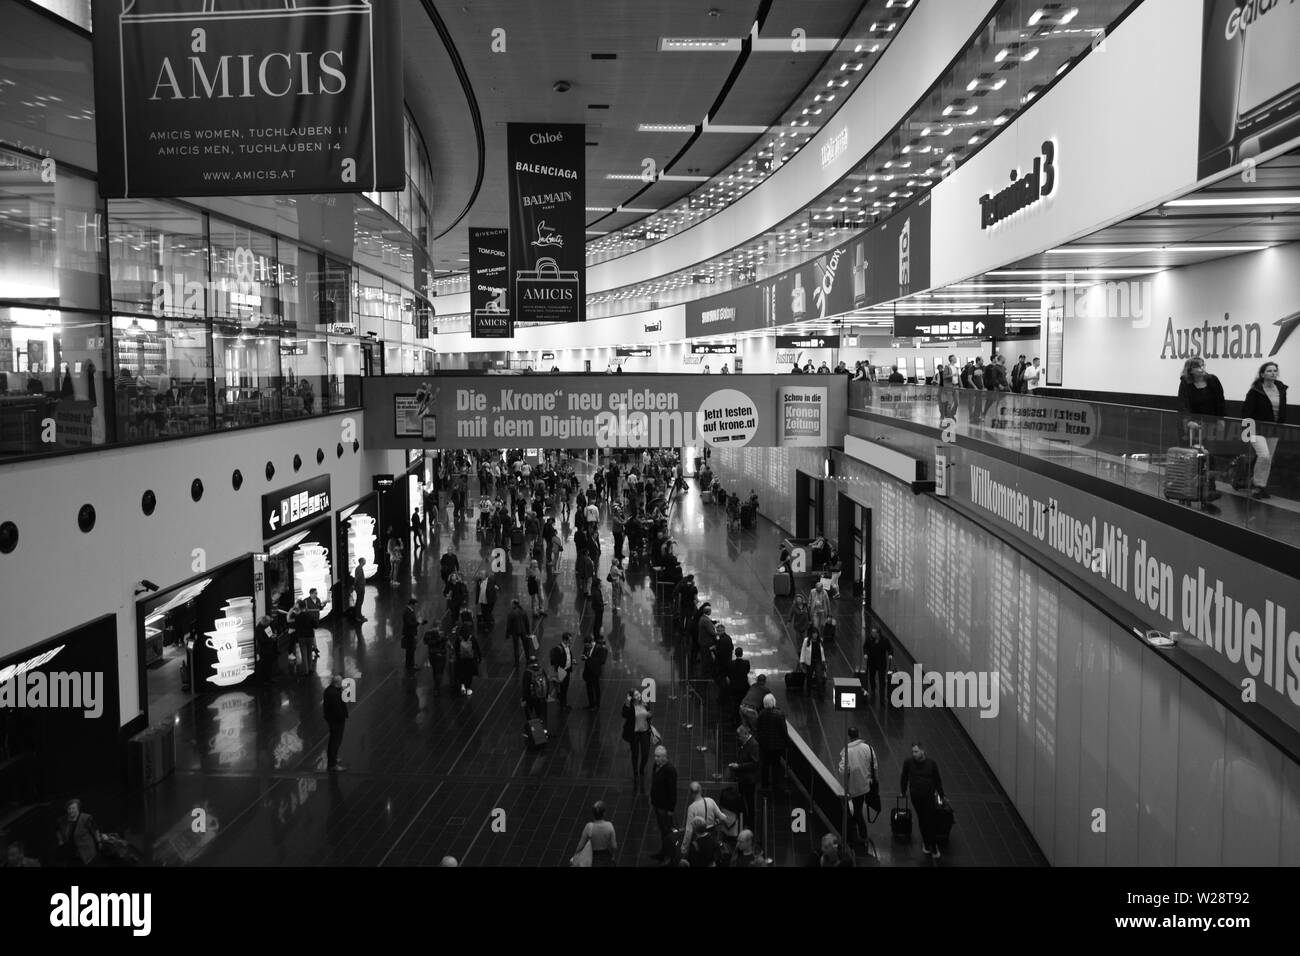 Vienna, Austria: May/20/2019 - Vienna International Airport (built in 1938 and the largest airport in Austria). People waiting for the arrivals to com Stock Photo